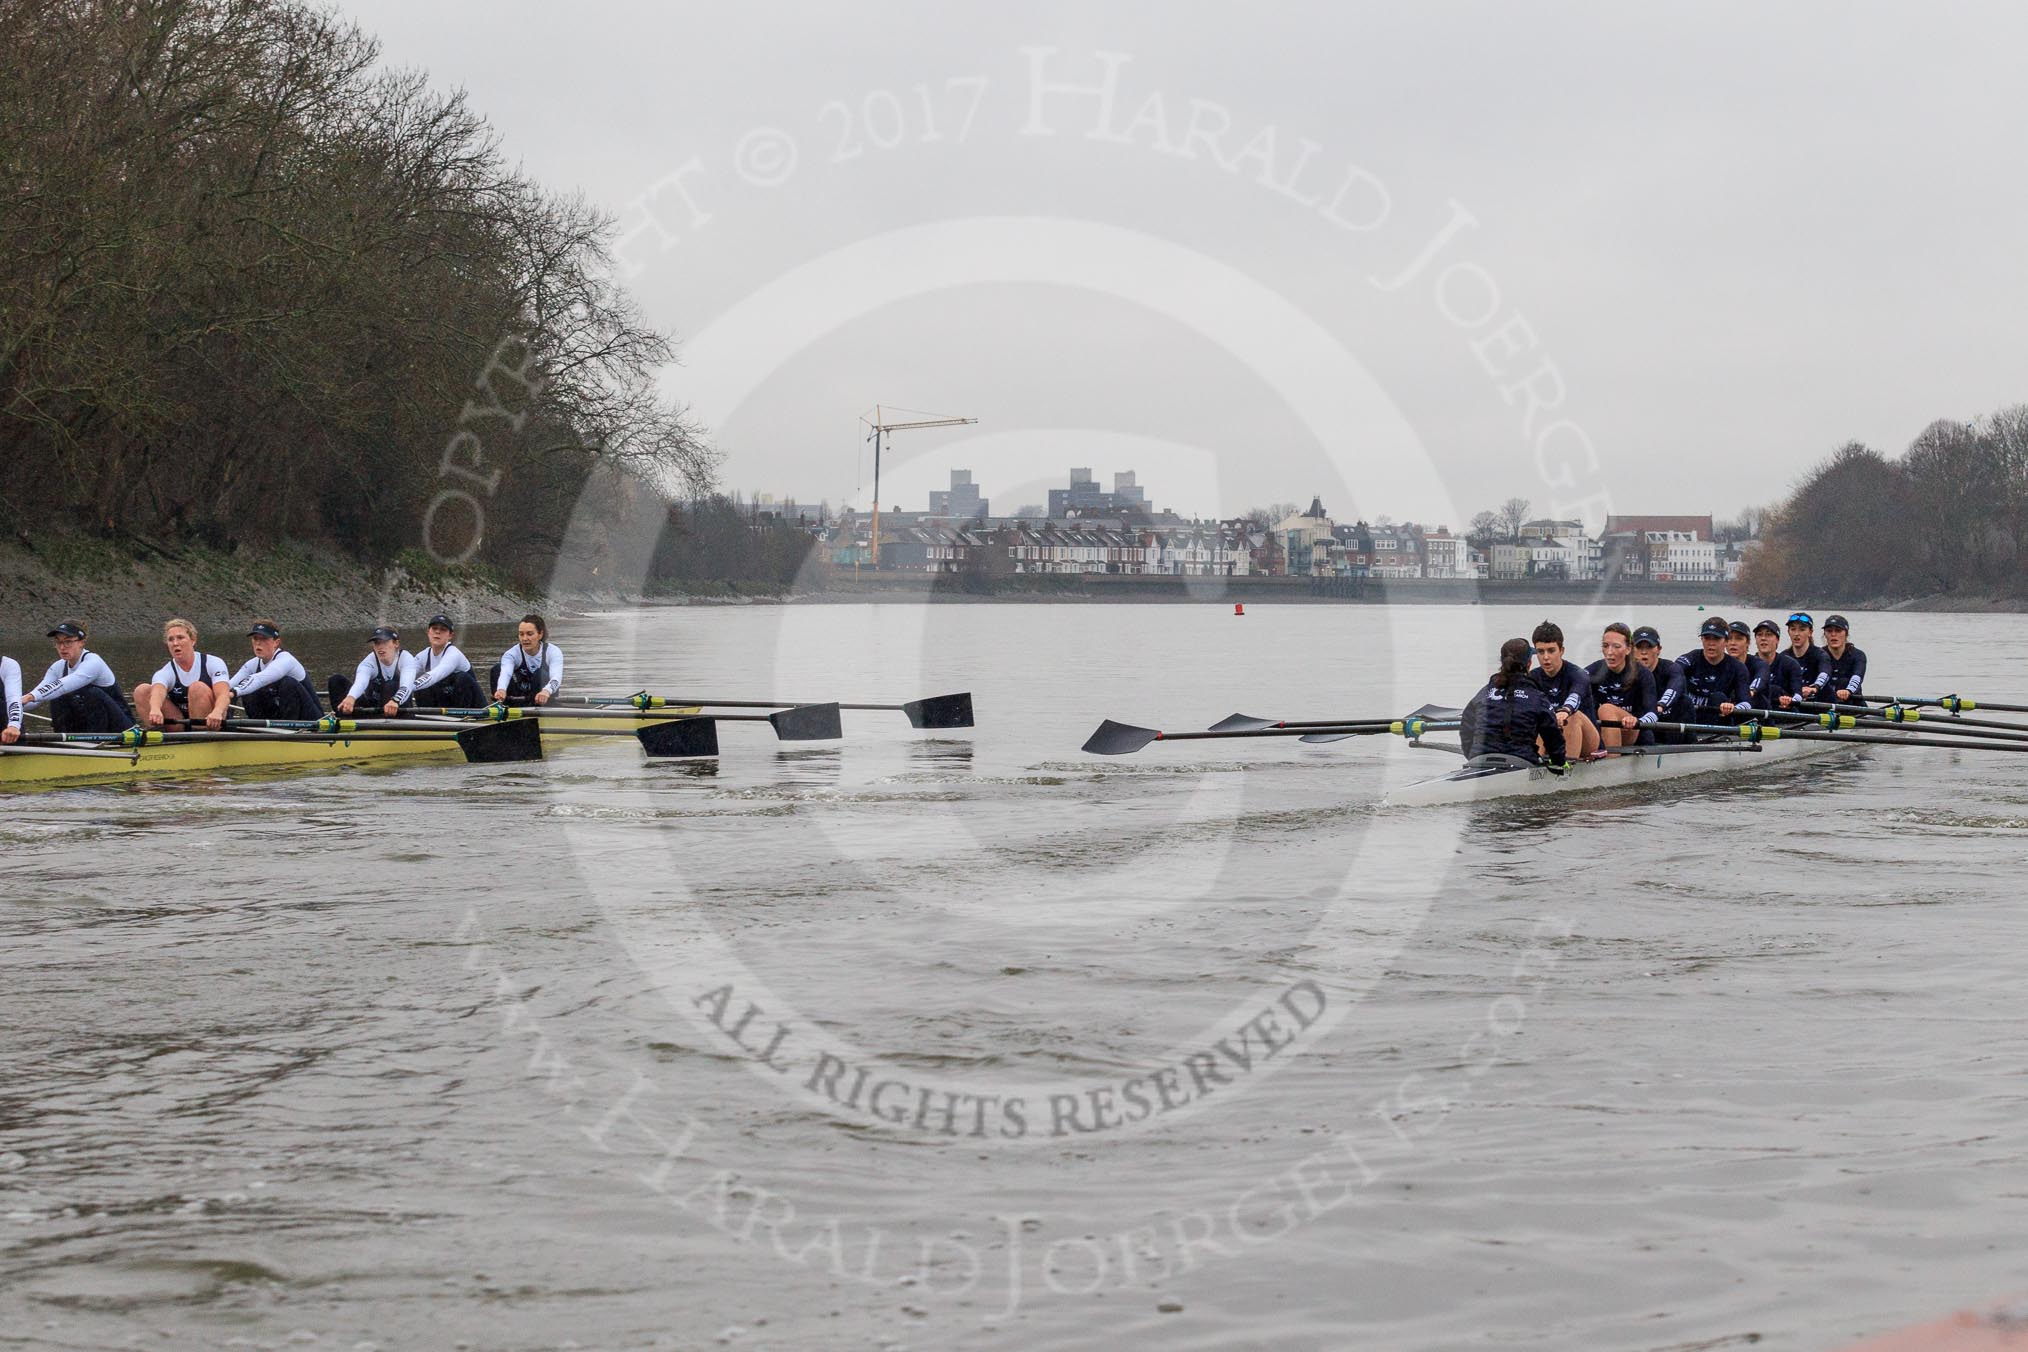 The Boat Race season 2018 - Women's Boat Race Trial Eights (OUWBC, Oxford): "Great Typhoon" and "Coursing River" near Chiswick Pier.
River Thames between Putney Bridge and Mortlake,
London SW15,

United Kingdom,
on 21 January 2018 at 14:40, image #143